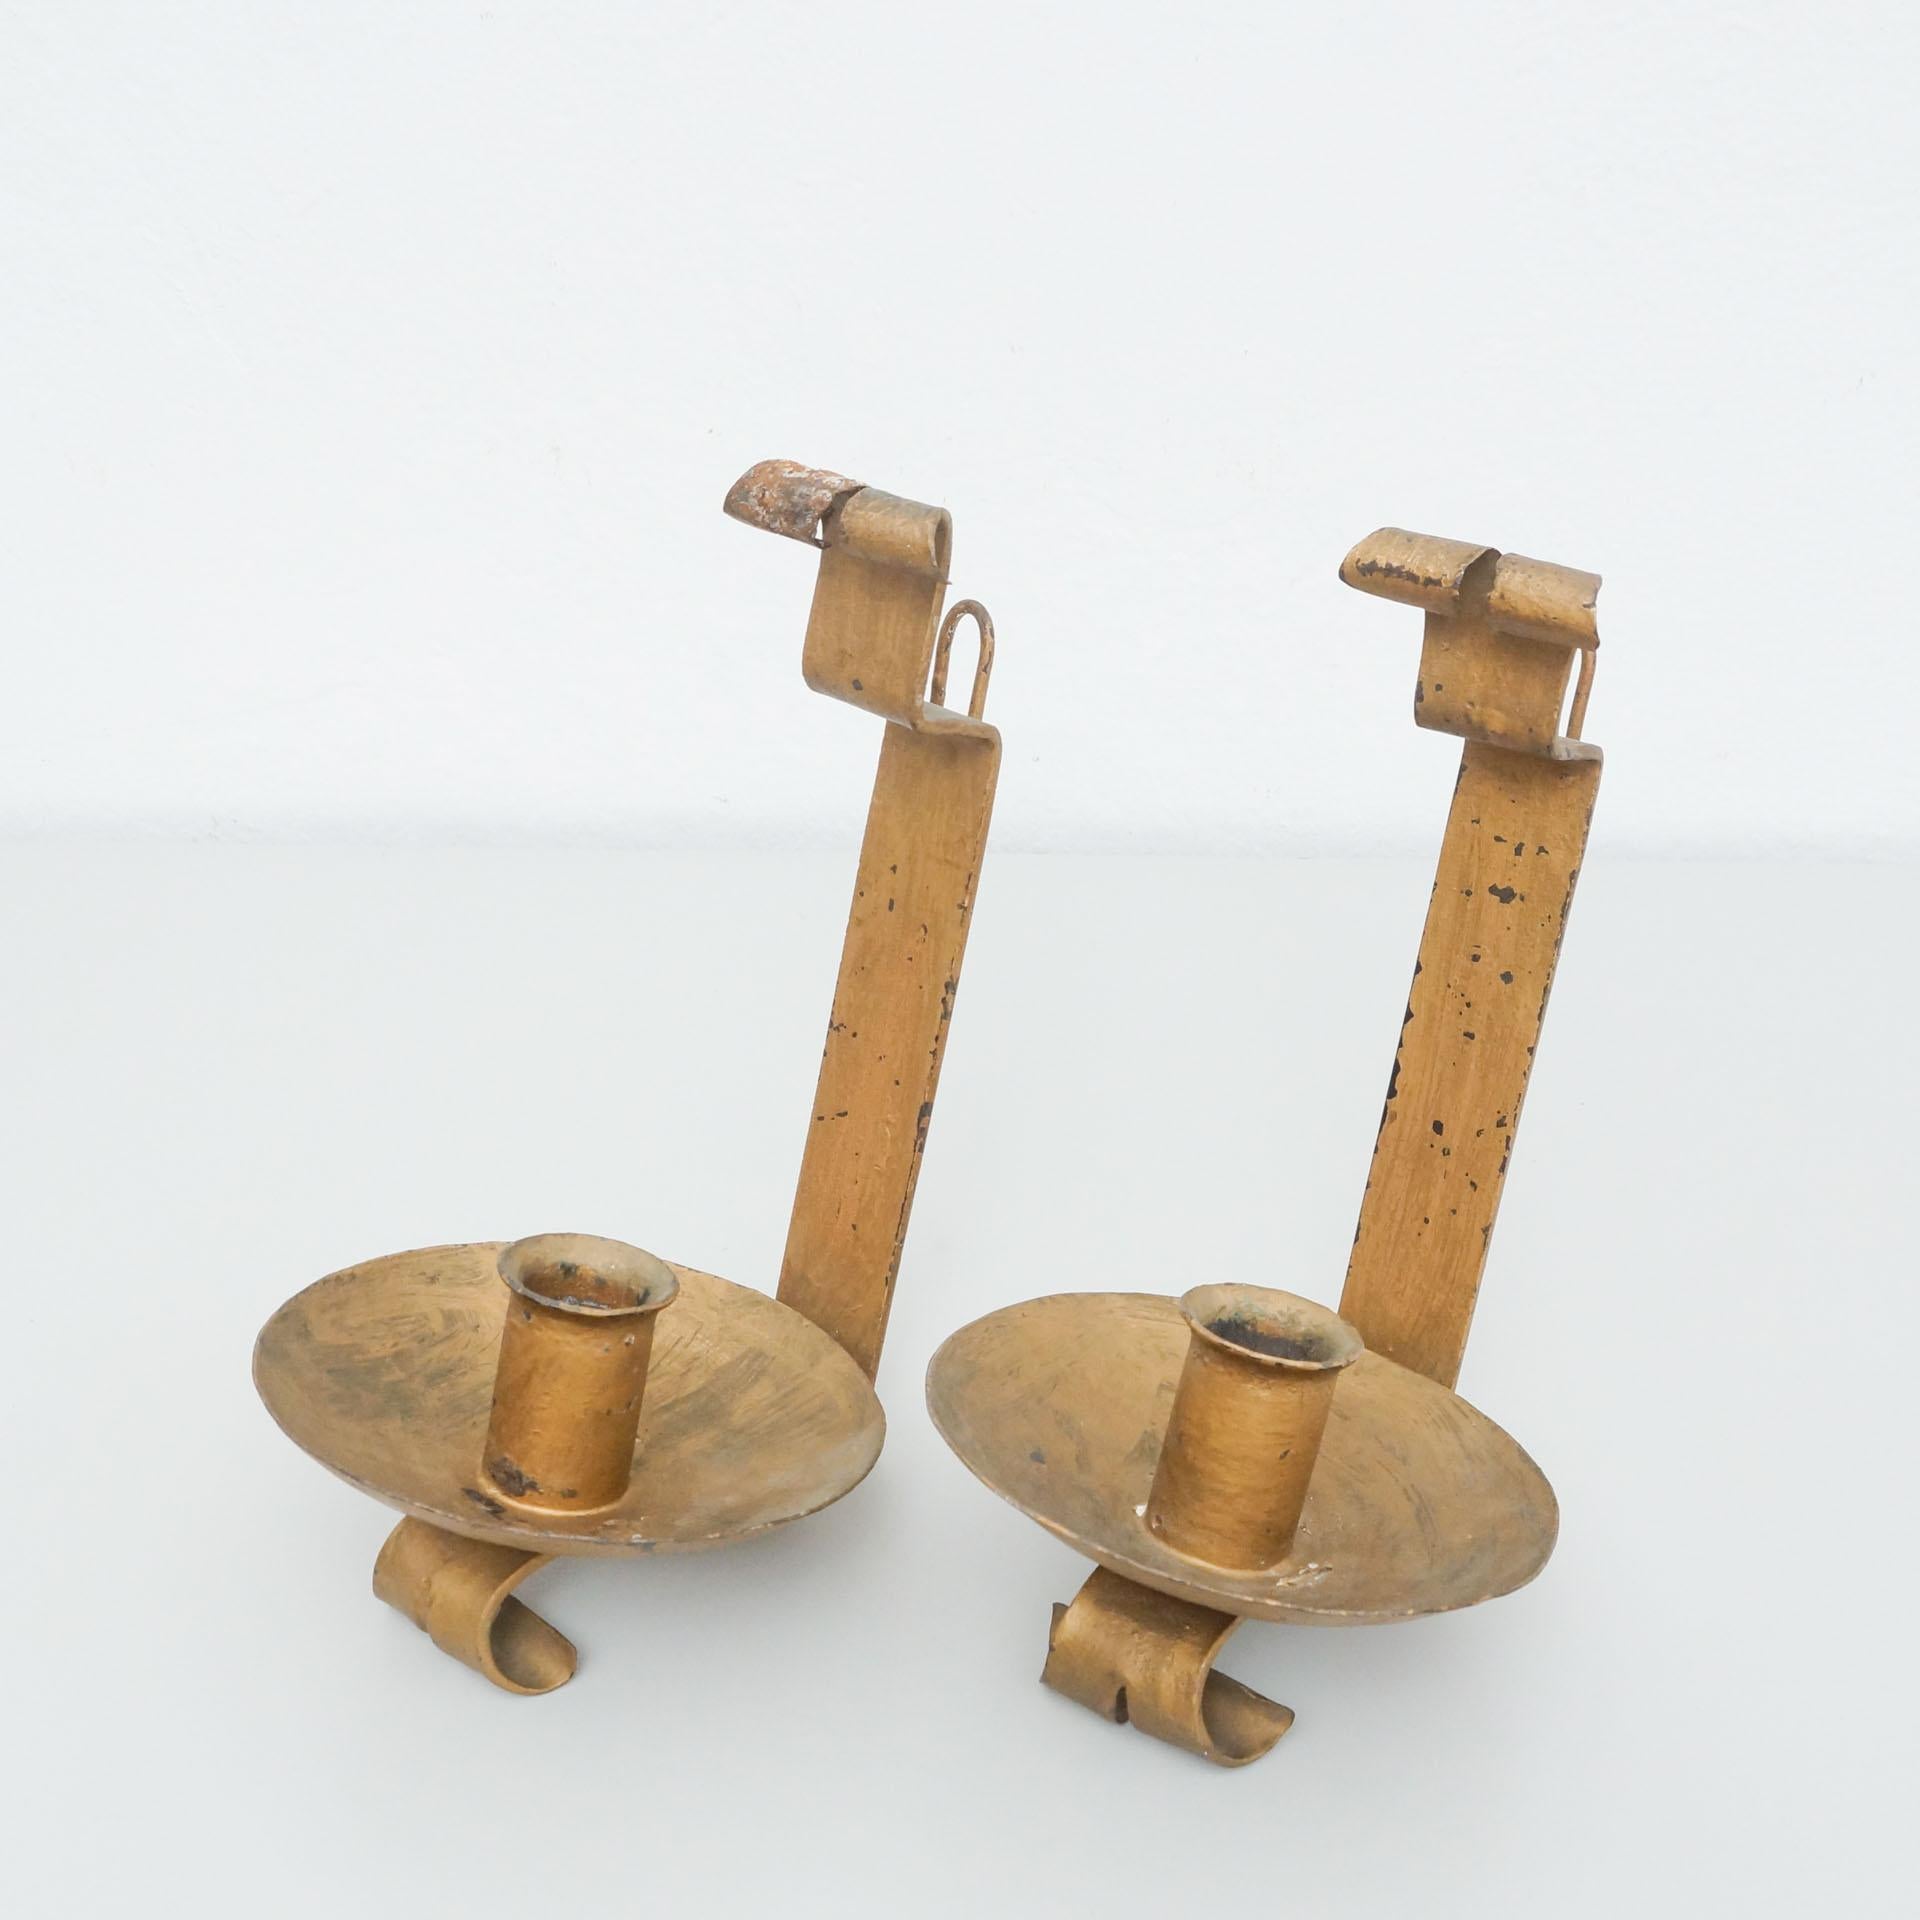 Set of two wall chandeliers for candles, circa 20th century.
By unknown manufacturer, Spain.

In original condition, with minor wear consistent with age and use, preserving a beautiful patina.

Materials:
Metal

Dimensions:
D 19 cm x W 17